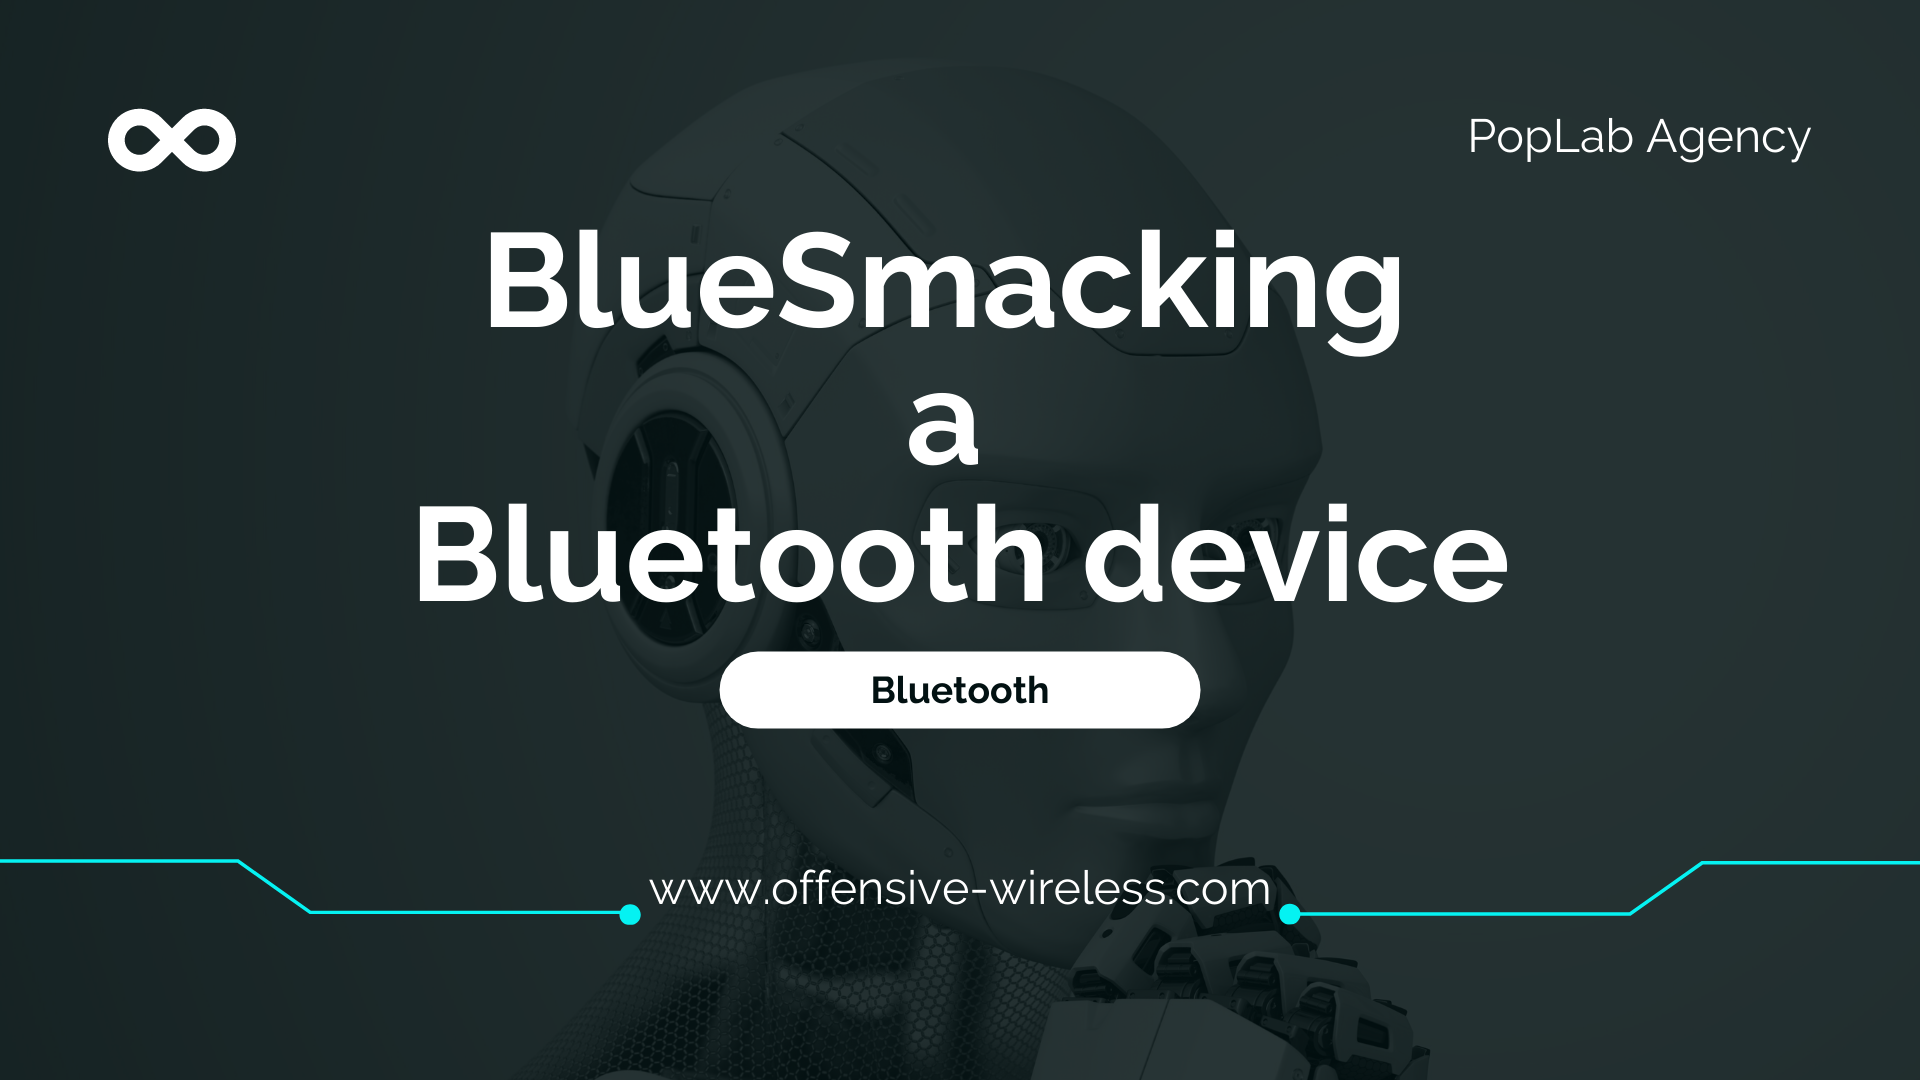 How to BlueSmacking a Bluetooth device